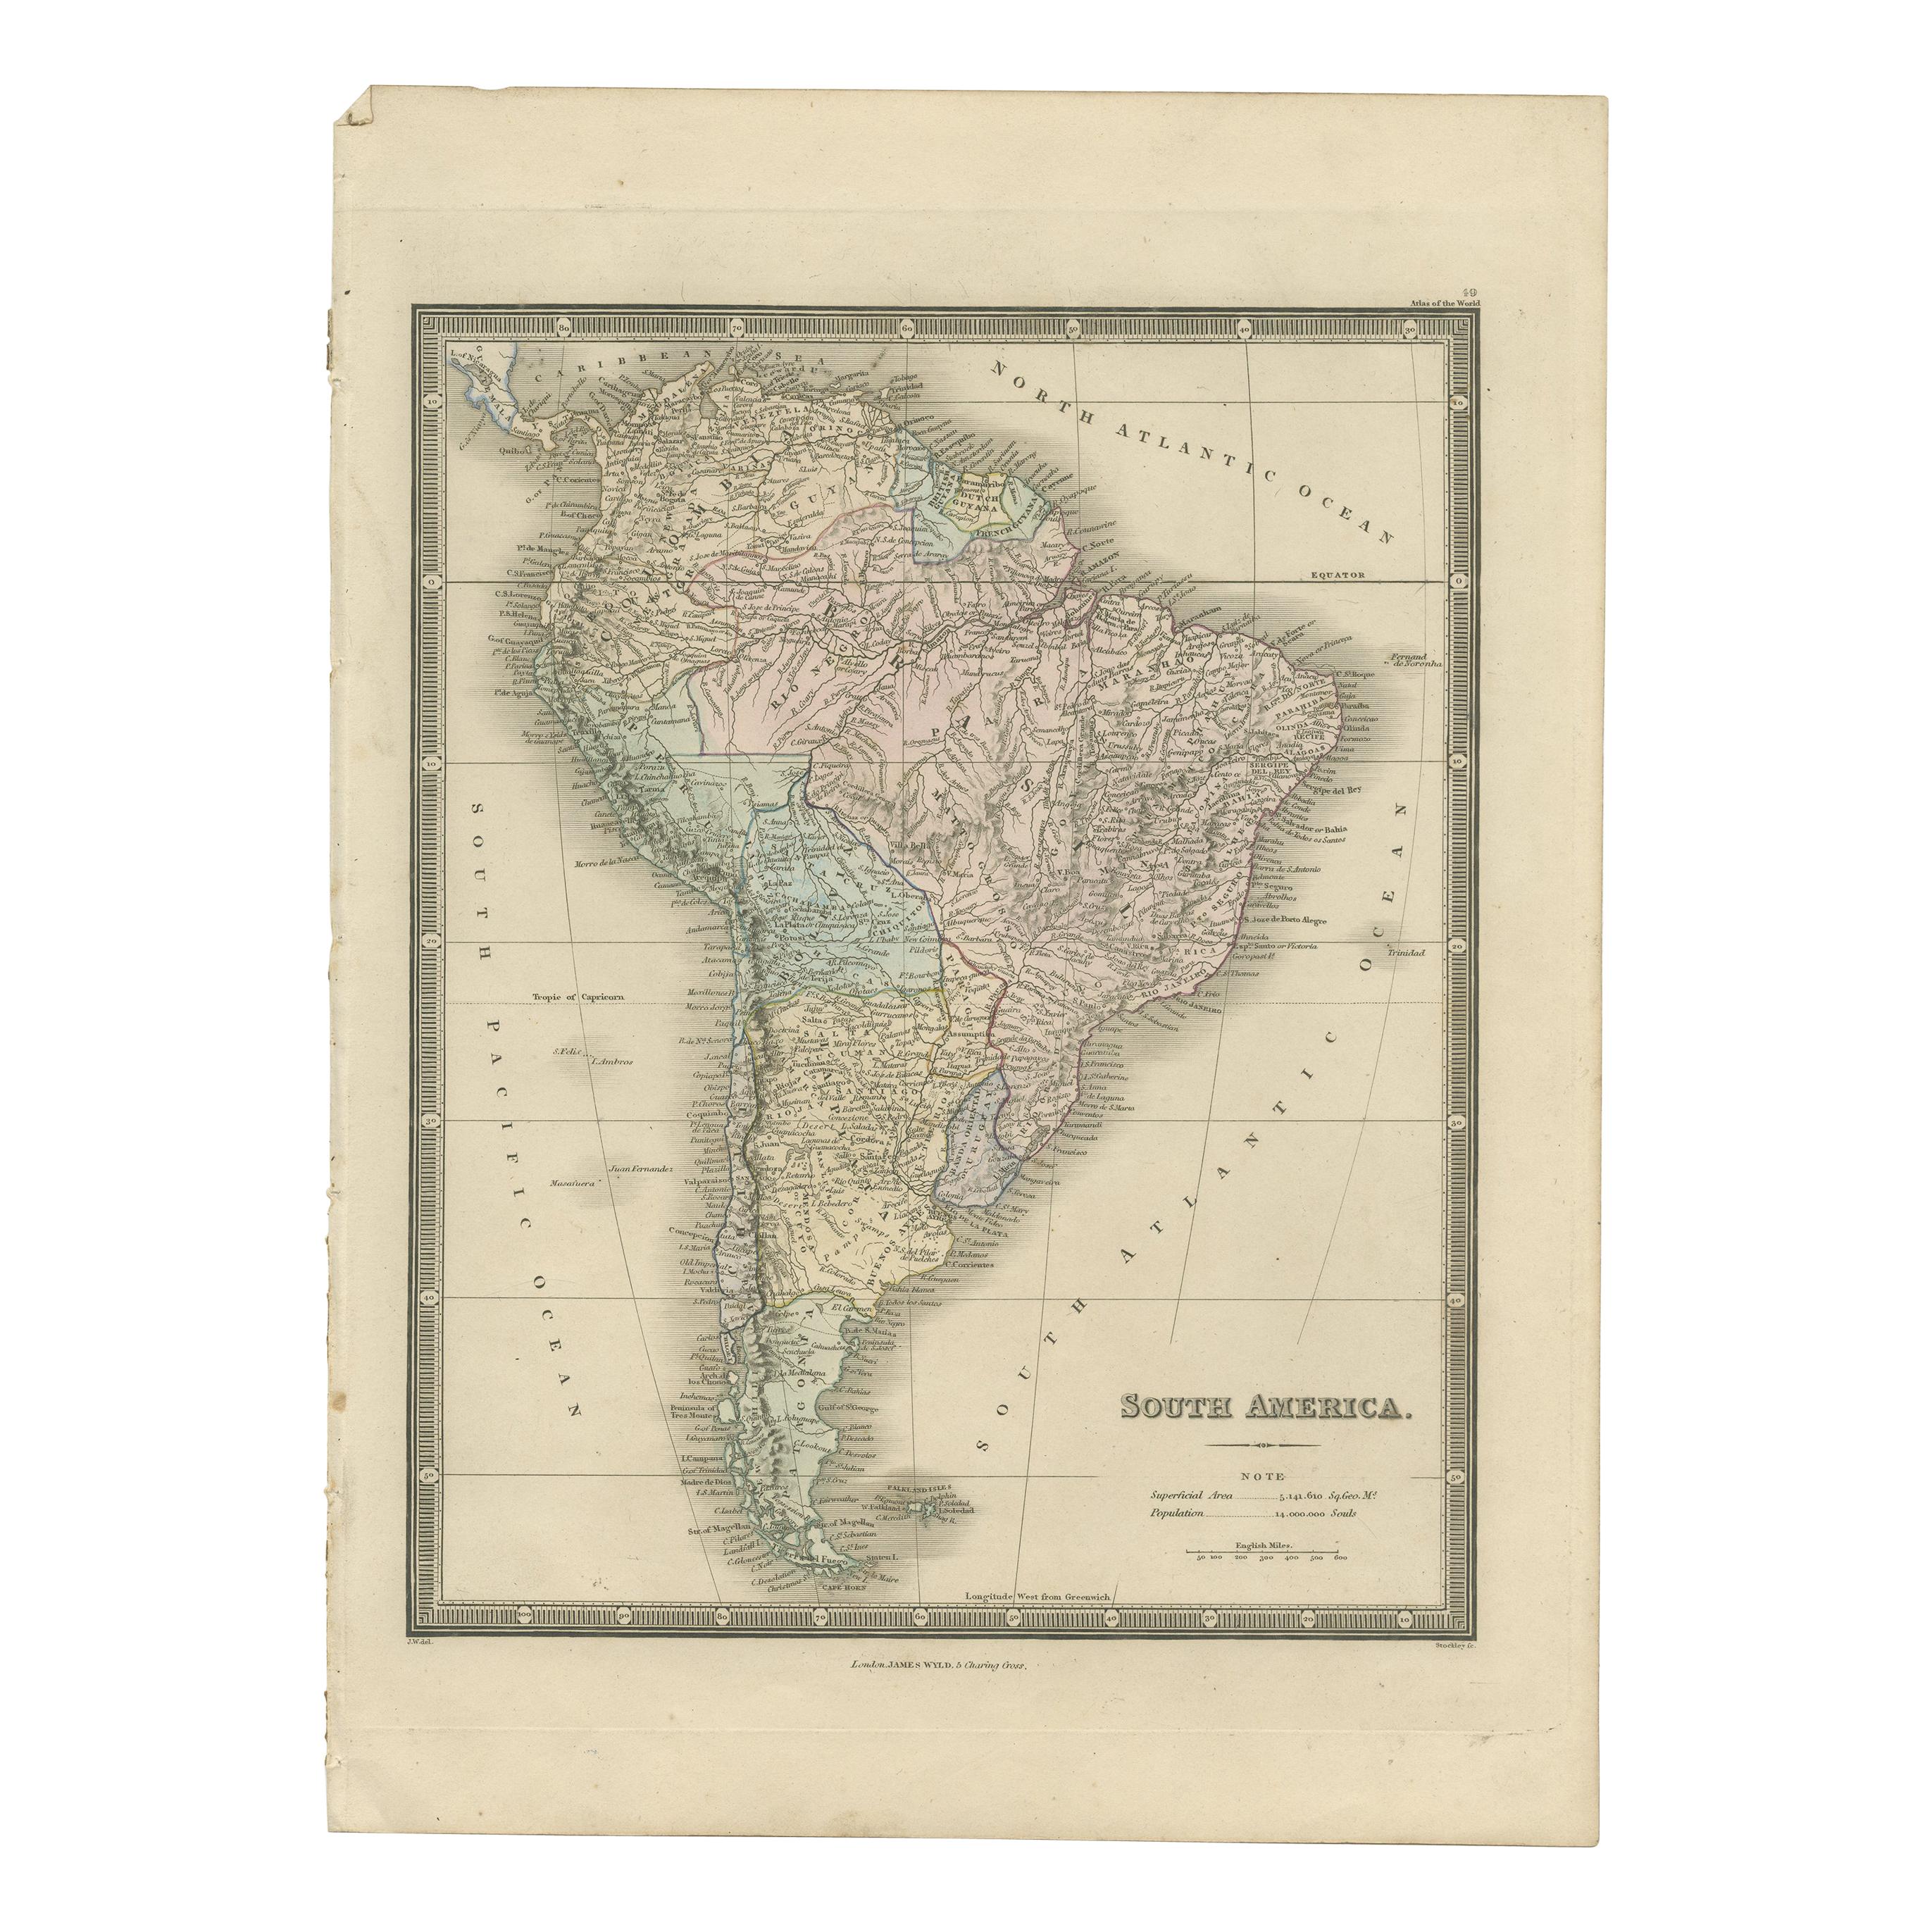 Antique Map of South America by Wyld, '1845'